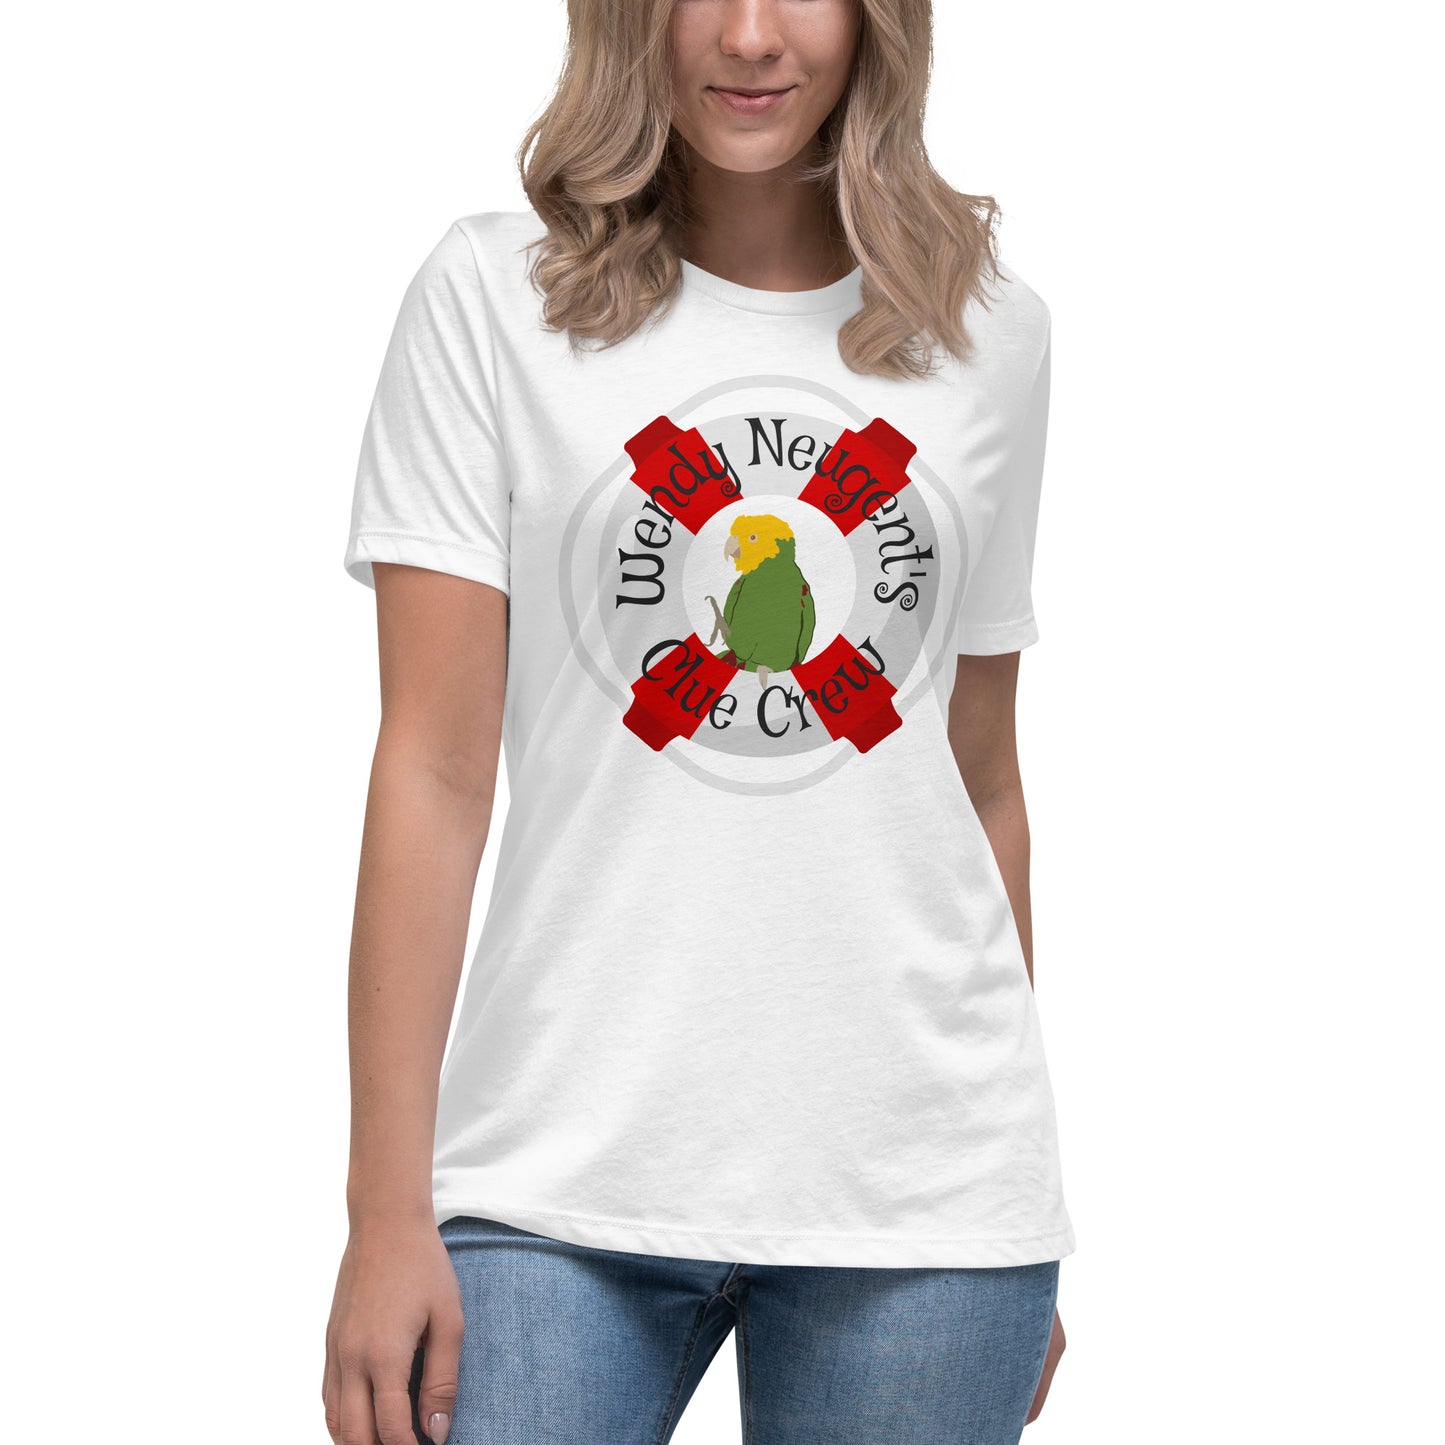 Wendy Neugent's Clue Crew Women's Relaxed T-Shirt